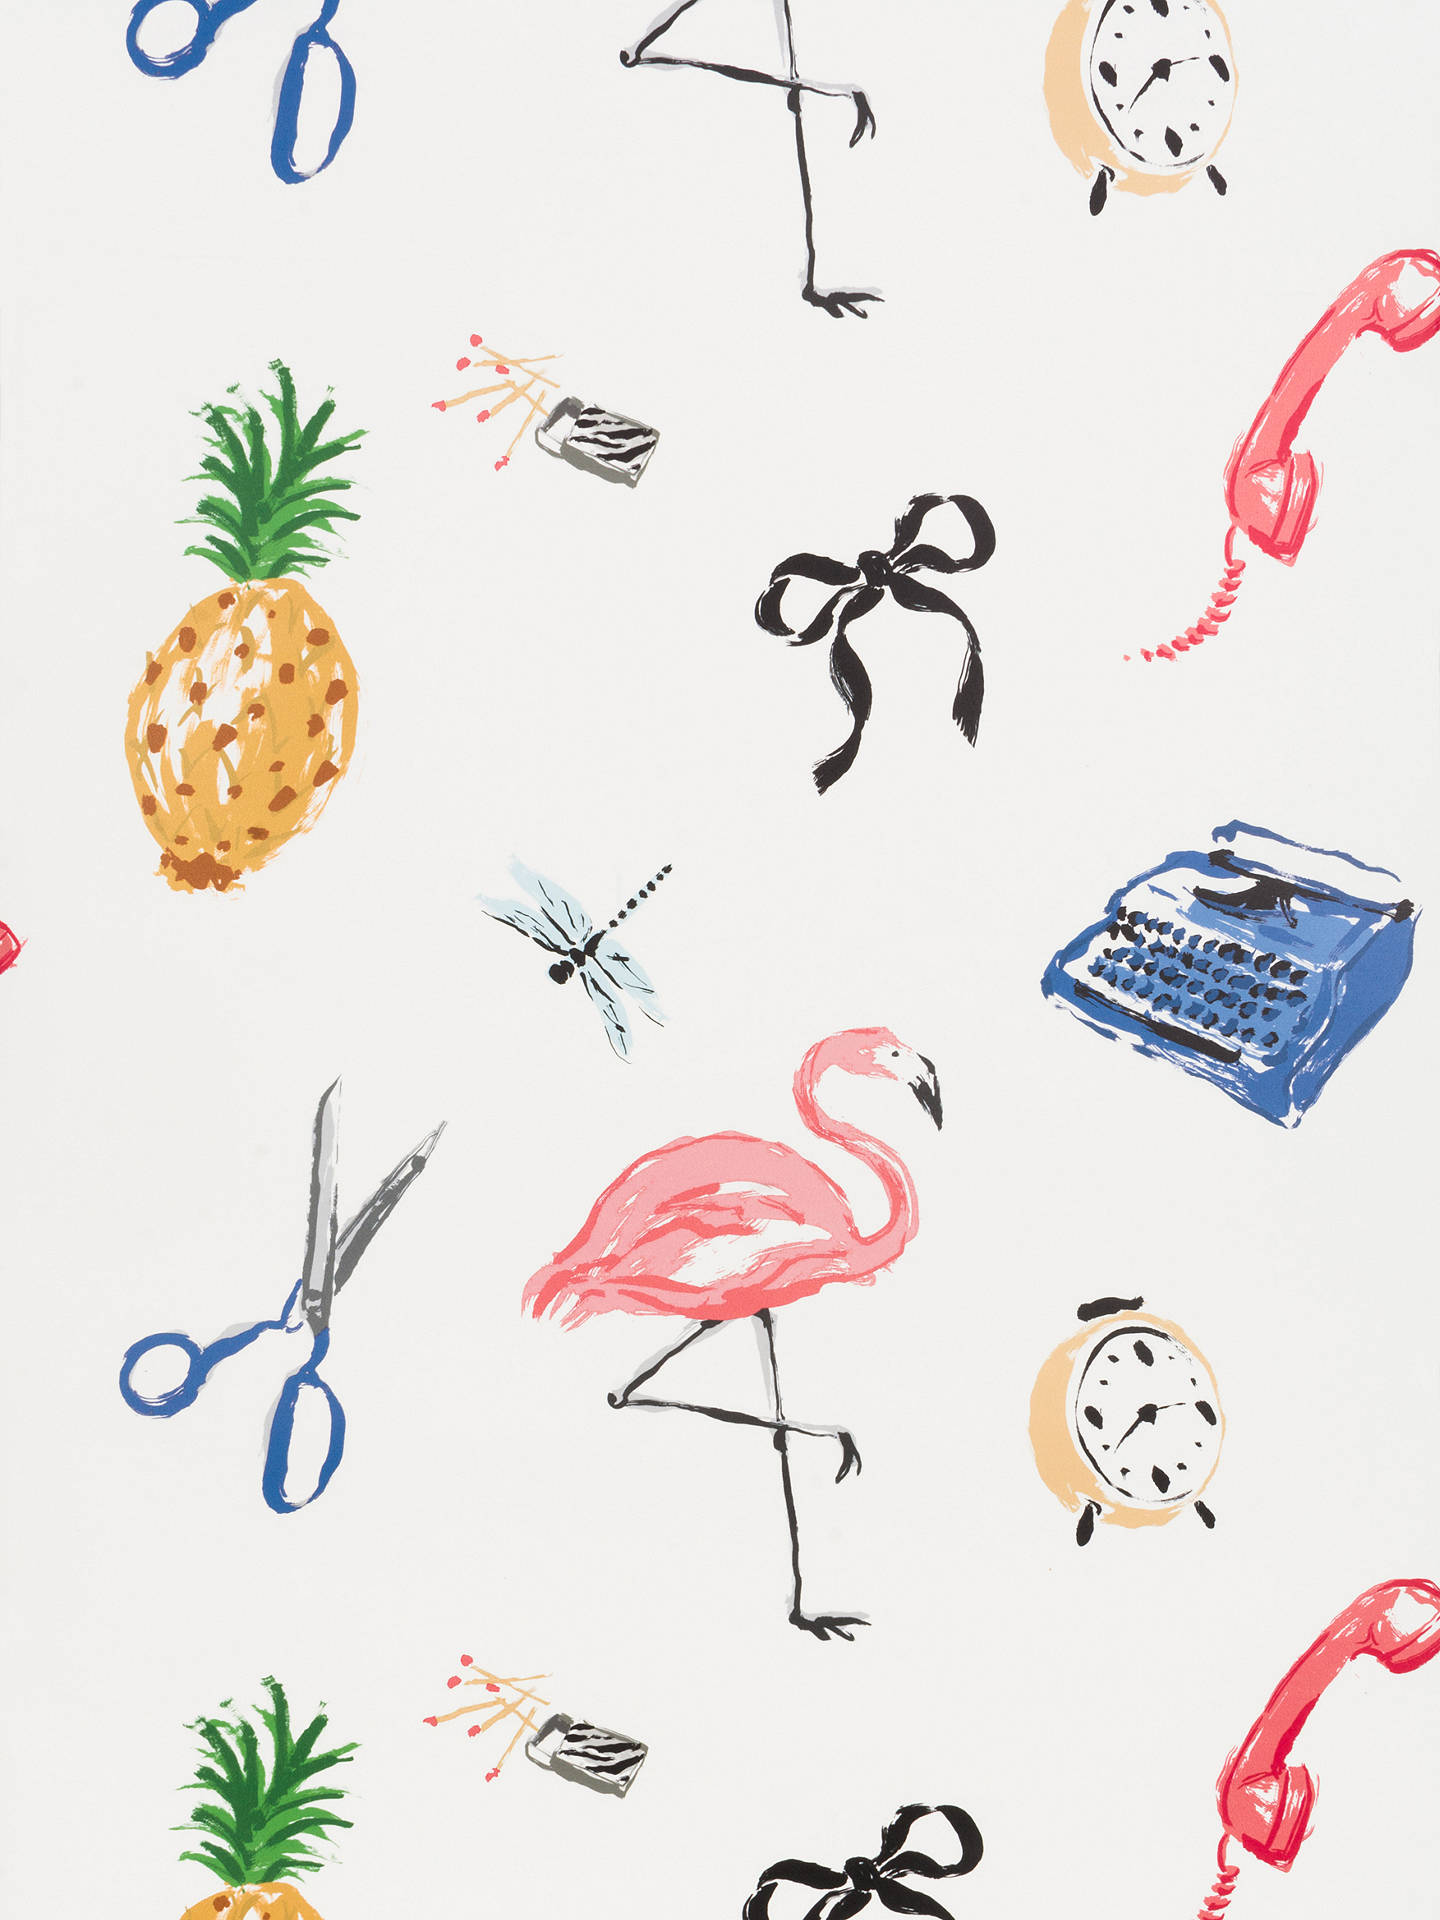 Kate Spade New York For Gp J Baker Whimsies Favourite Things Wallpaper W3307 517 At John Lewis Partners